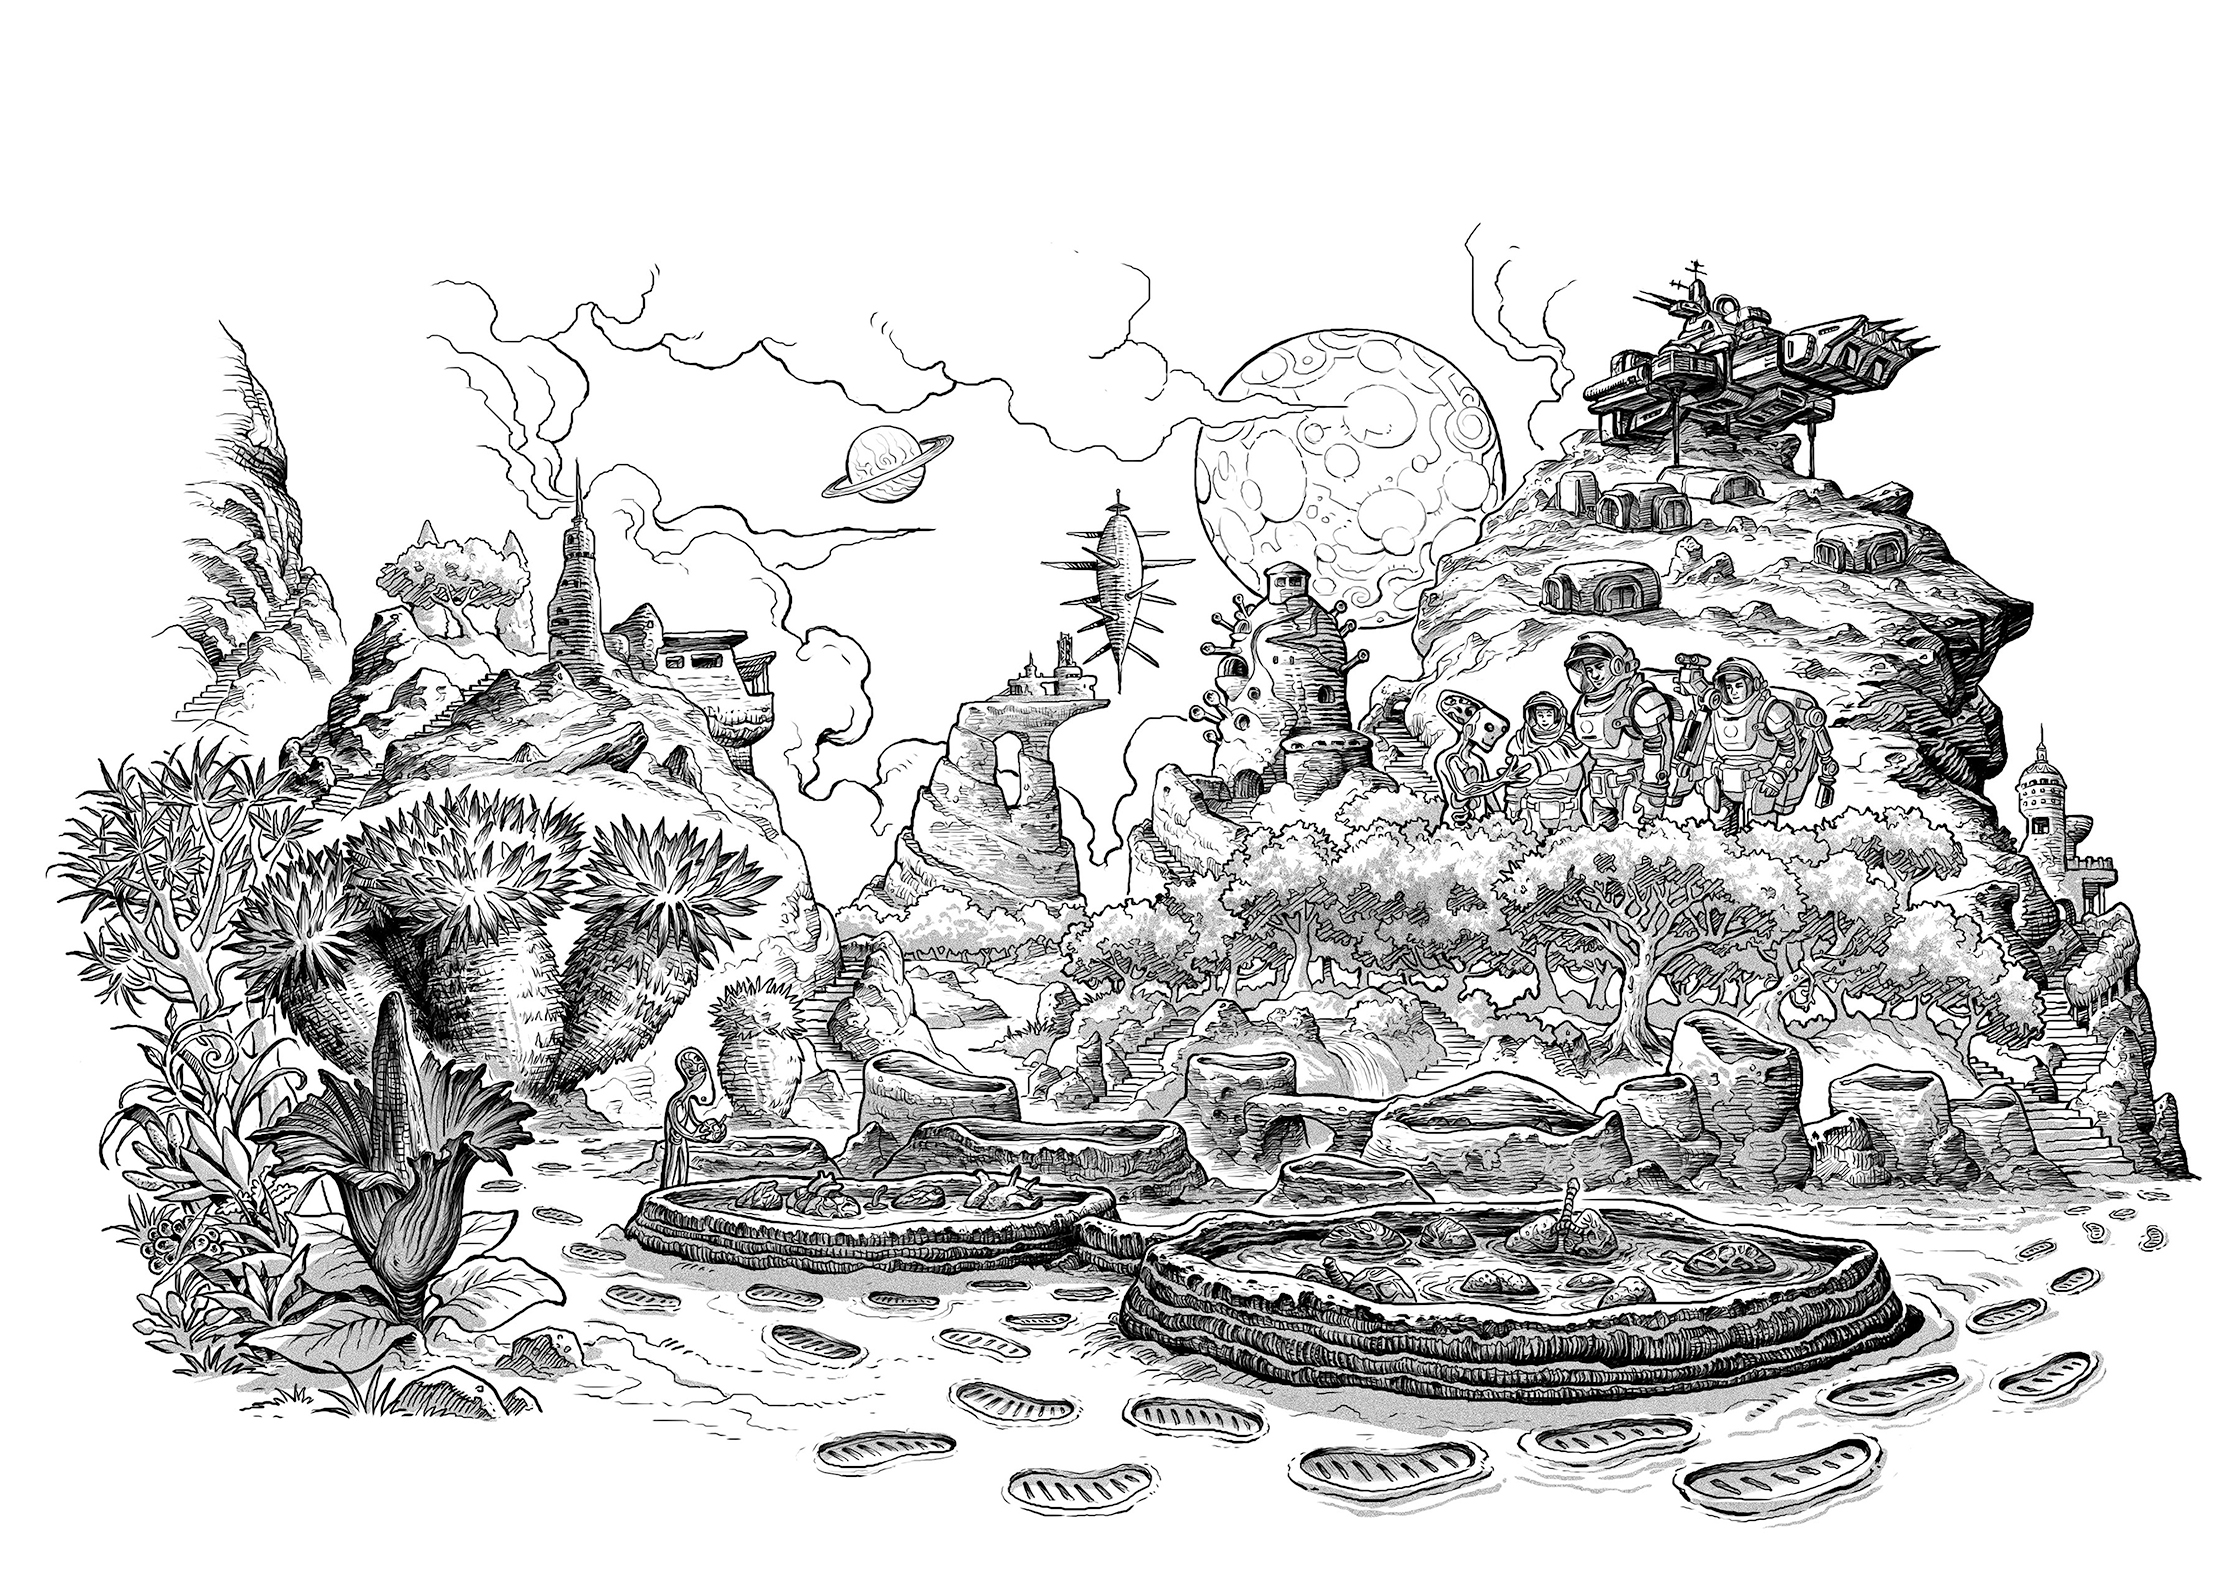 Gorgeous Ink drawing of an alien landscape